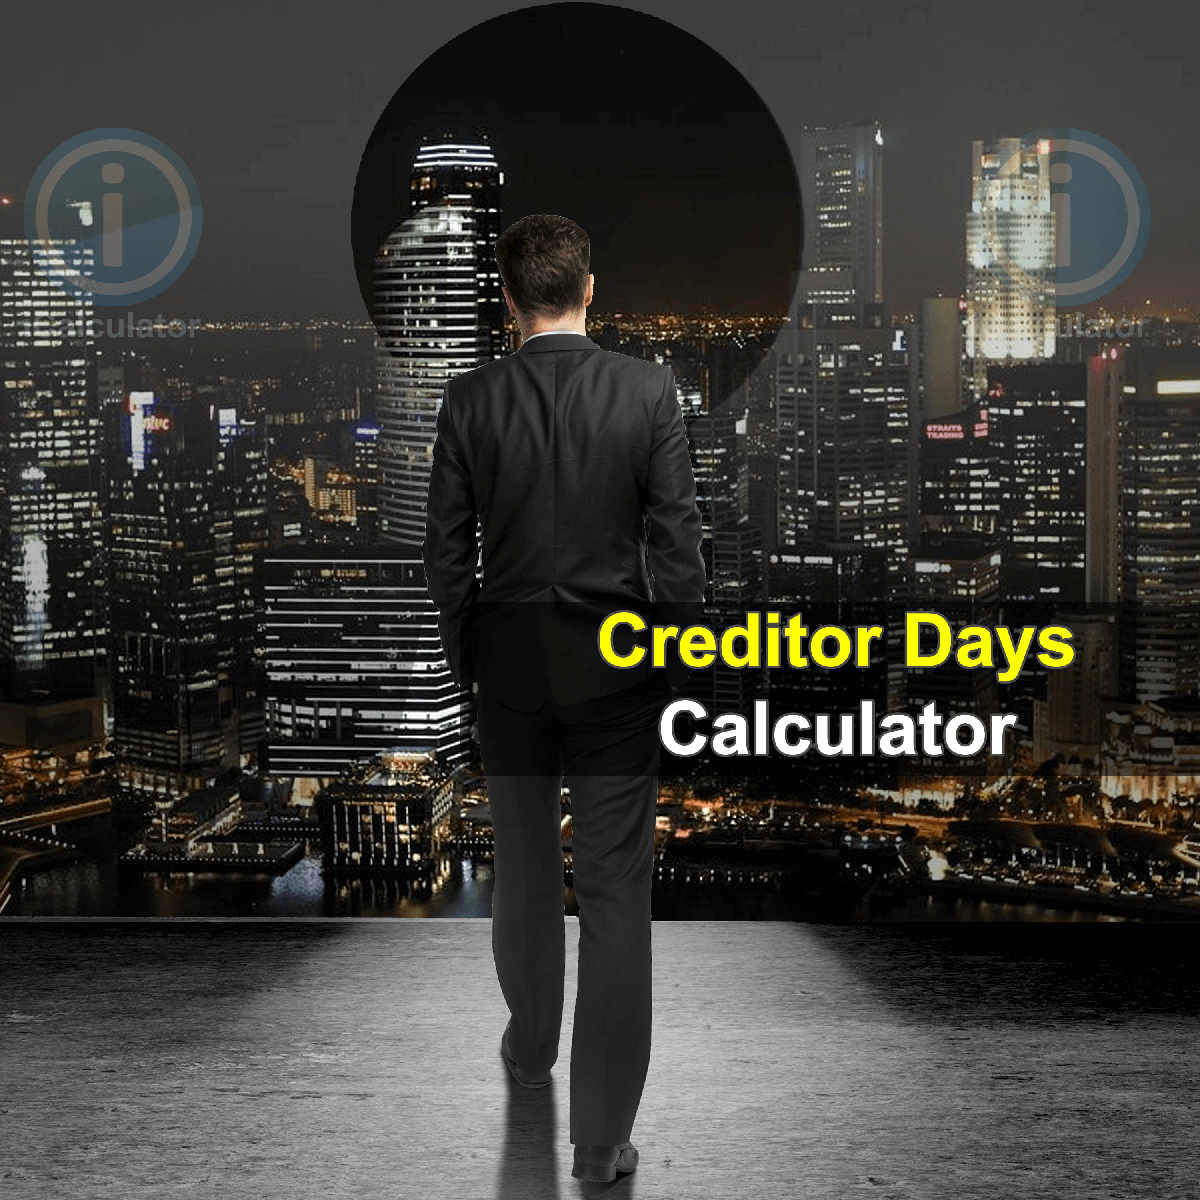 Creditor Days Calculator. This image provides details of how to calculate the creditor days using a calculator and notepad. By using the credit finance formula, the Creditor Days Calculator provides a true calculation of the average number of days a company takes to pay its bills and invoices to its creditors.